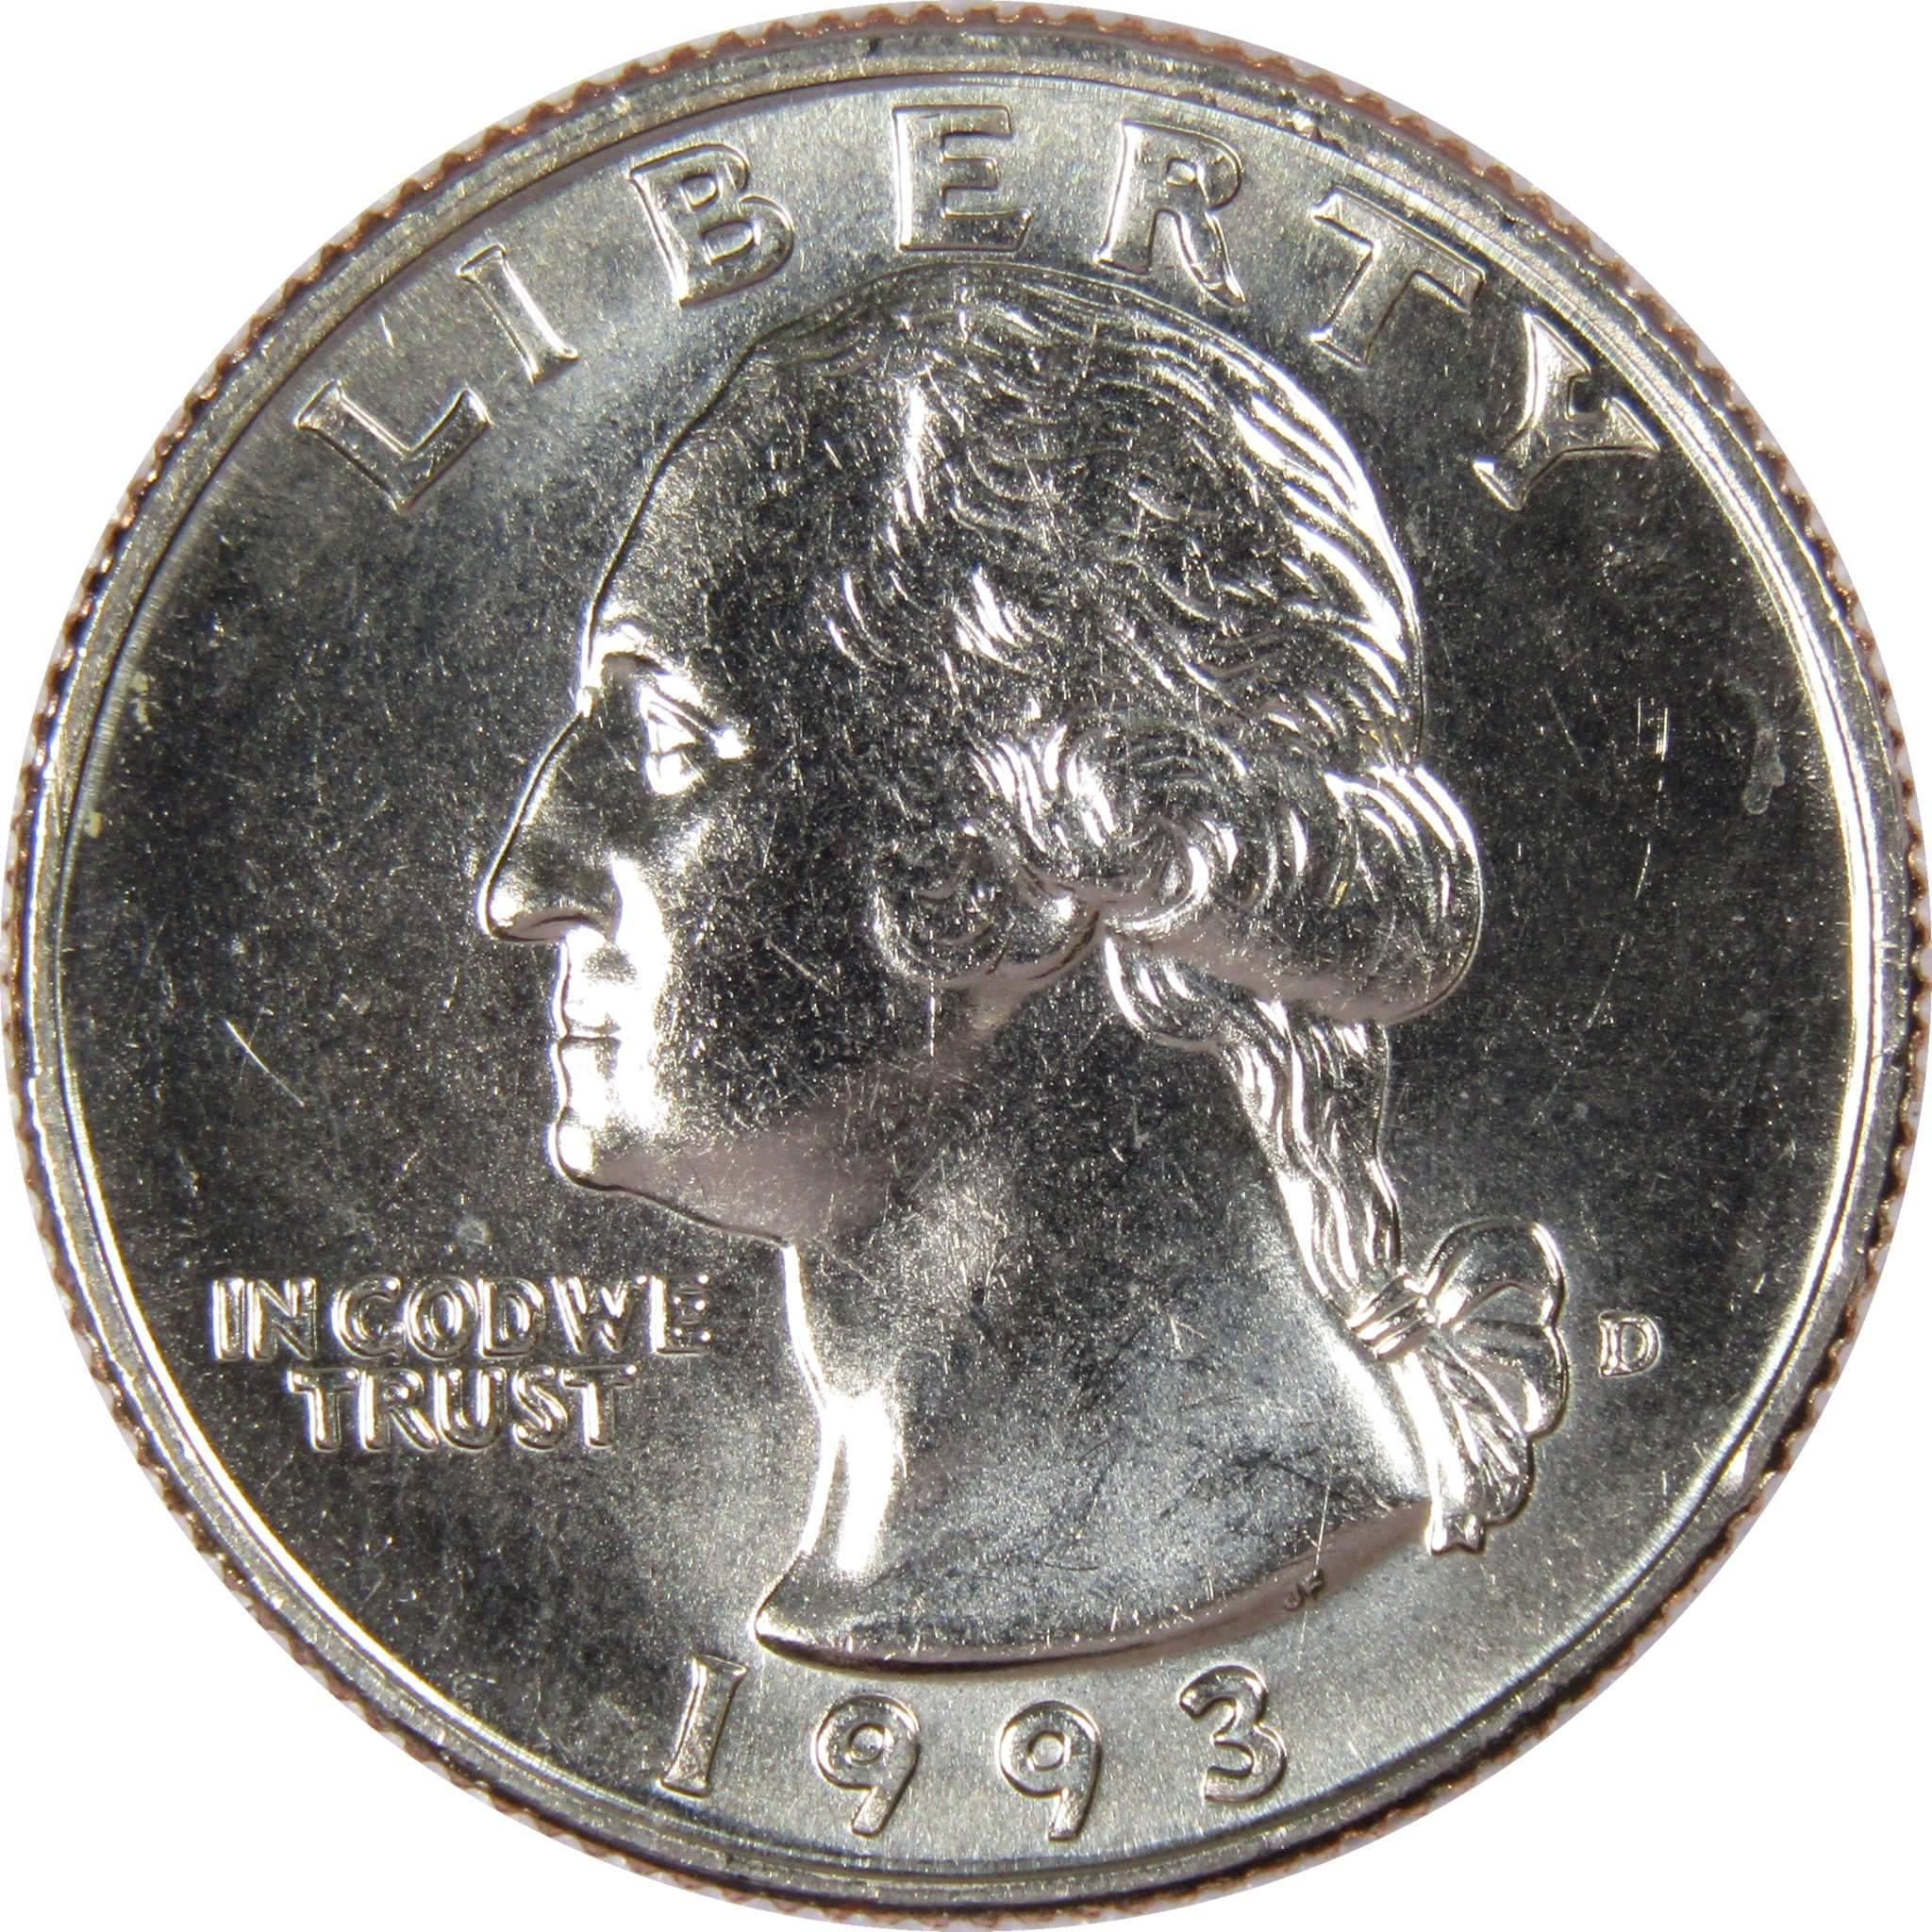 1993 D Washington Quarter BU Uncirculated Mint State 25c US Coin Collectible